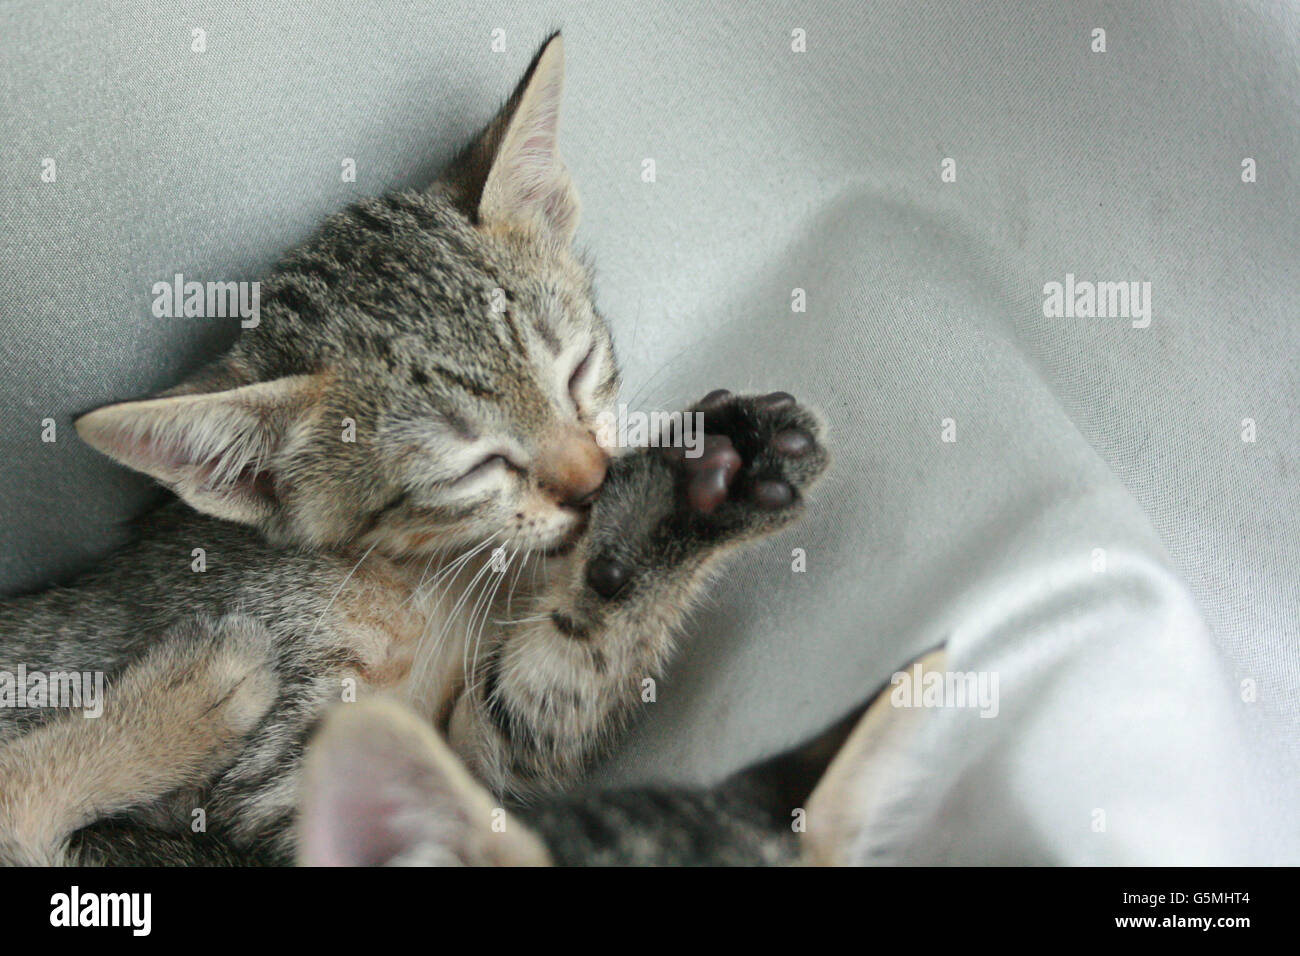 Adorable funny Cute Kitten cat close eye lick itself for cleaning on white grey soft cloth bed at home. Stock Photo